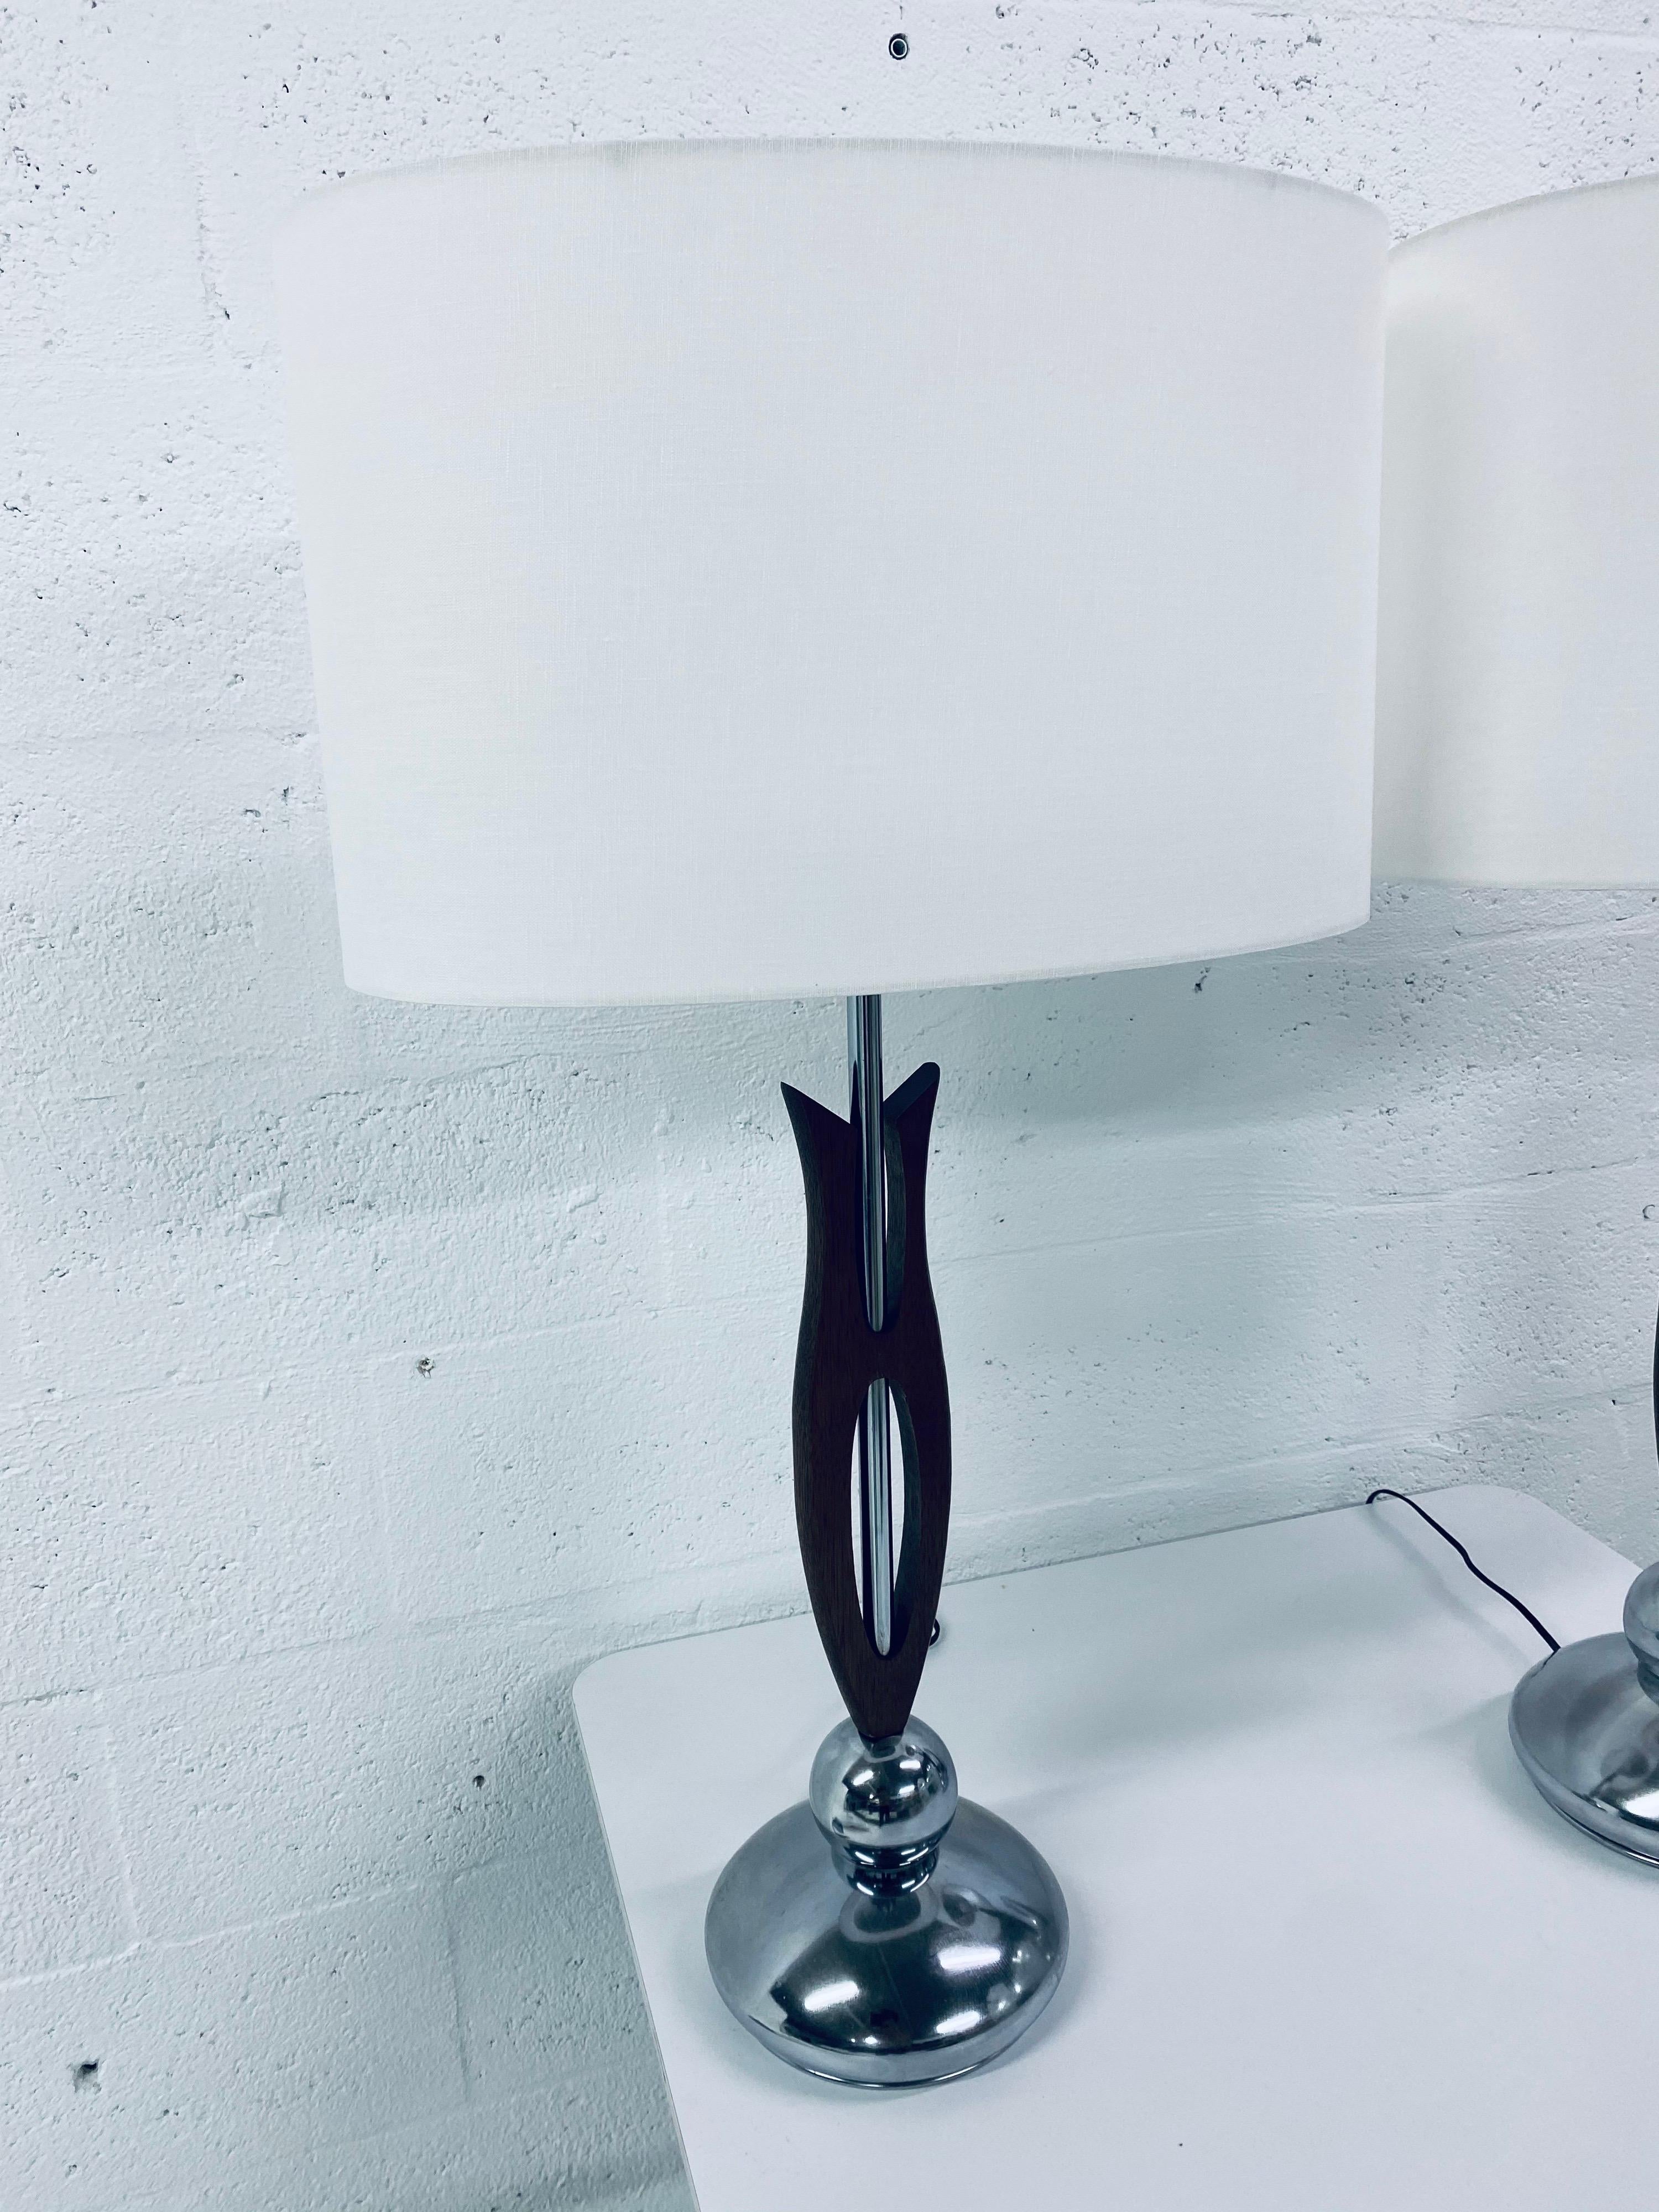 Two desk or table lamps by Nova Lighting with chrome hardware and carved wood detailing. Bright white oval lampshades are new and made from 100% cotton linen.